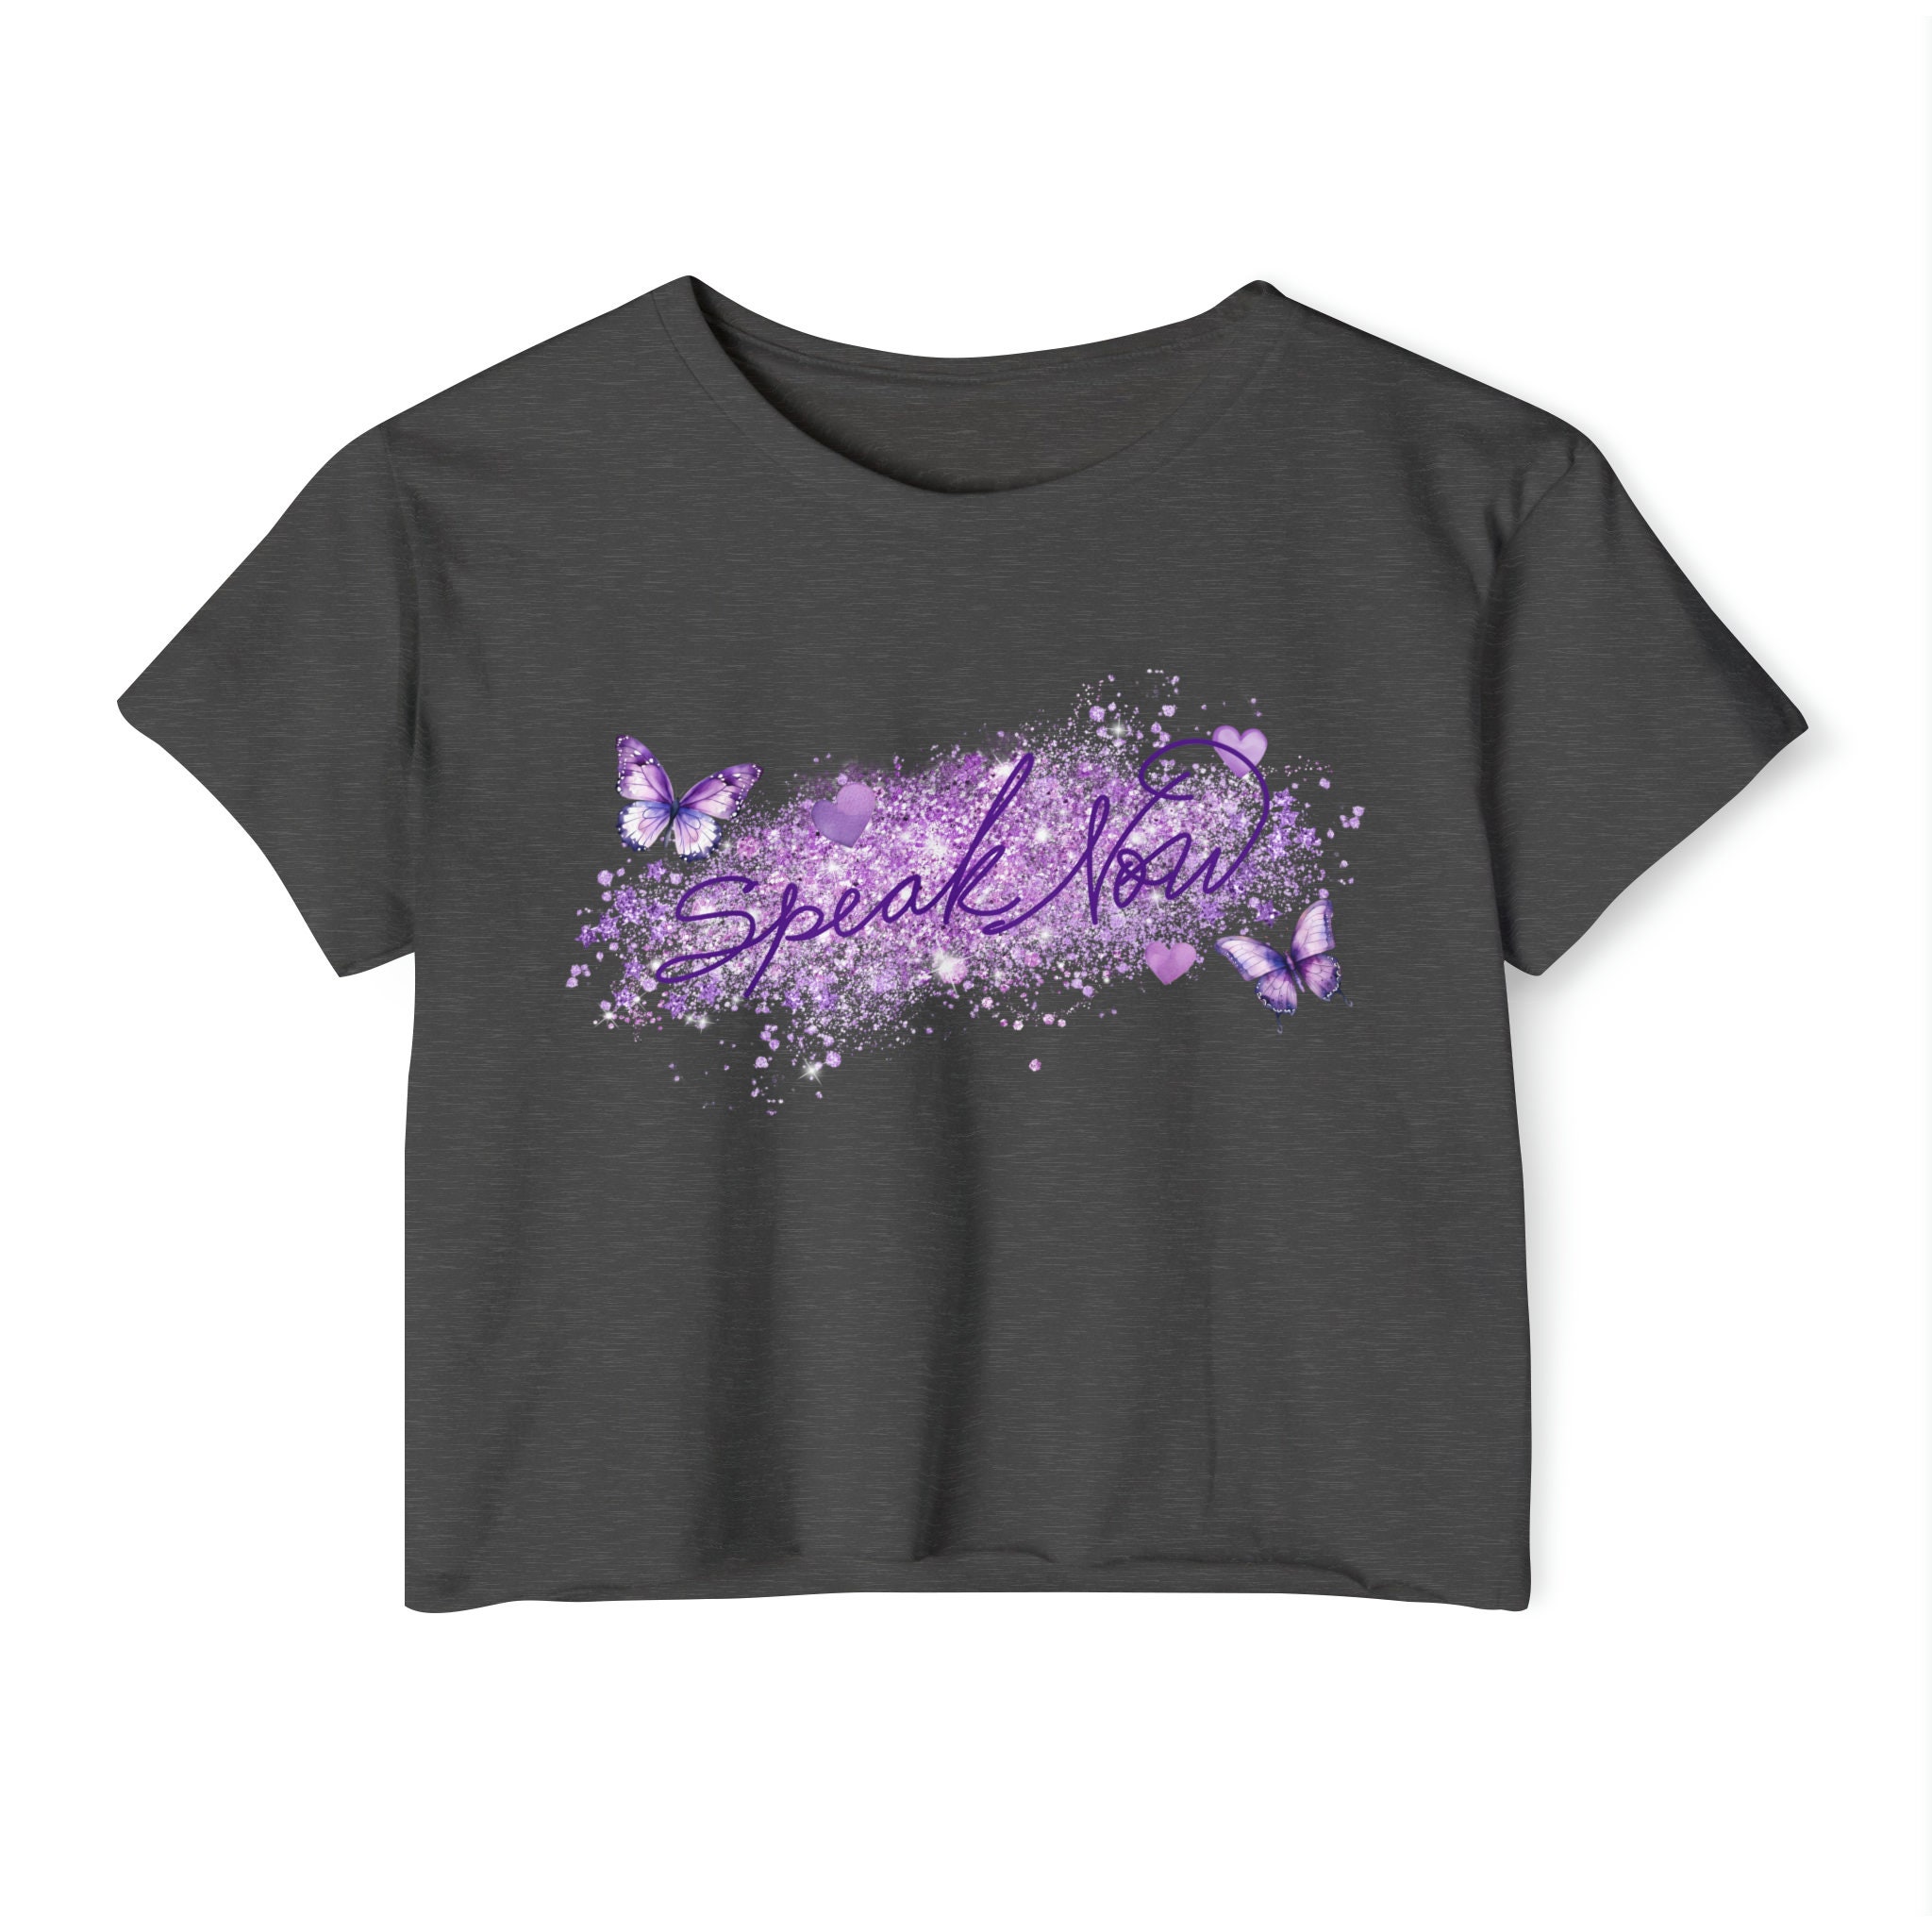 Speak Now Taylor Crop Top Shirt, Taylor Flowy Cropped Tee